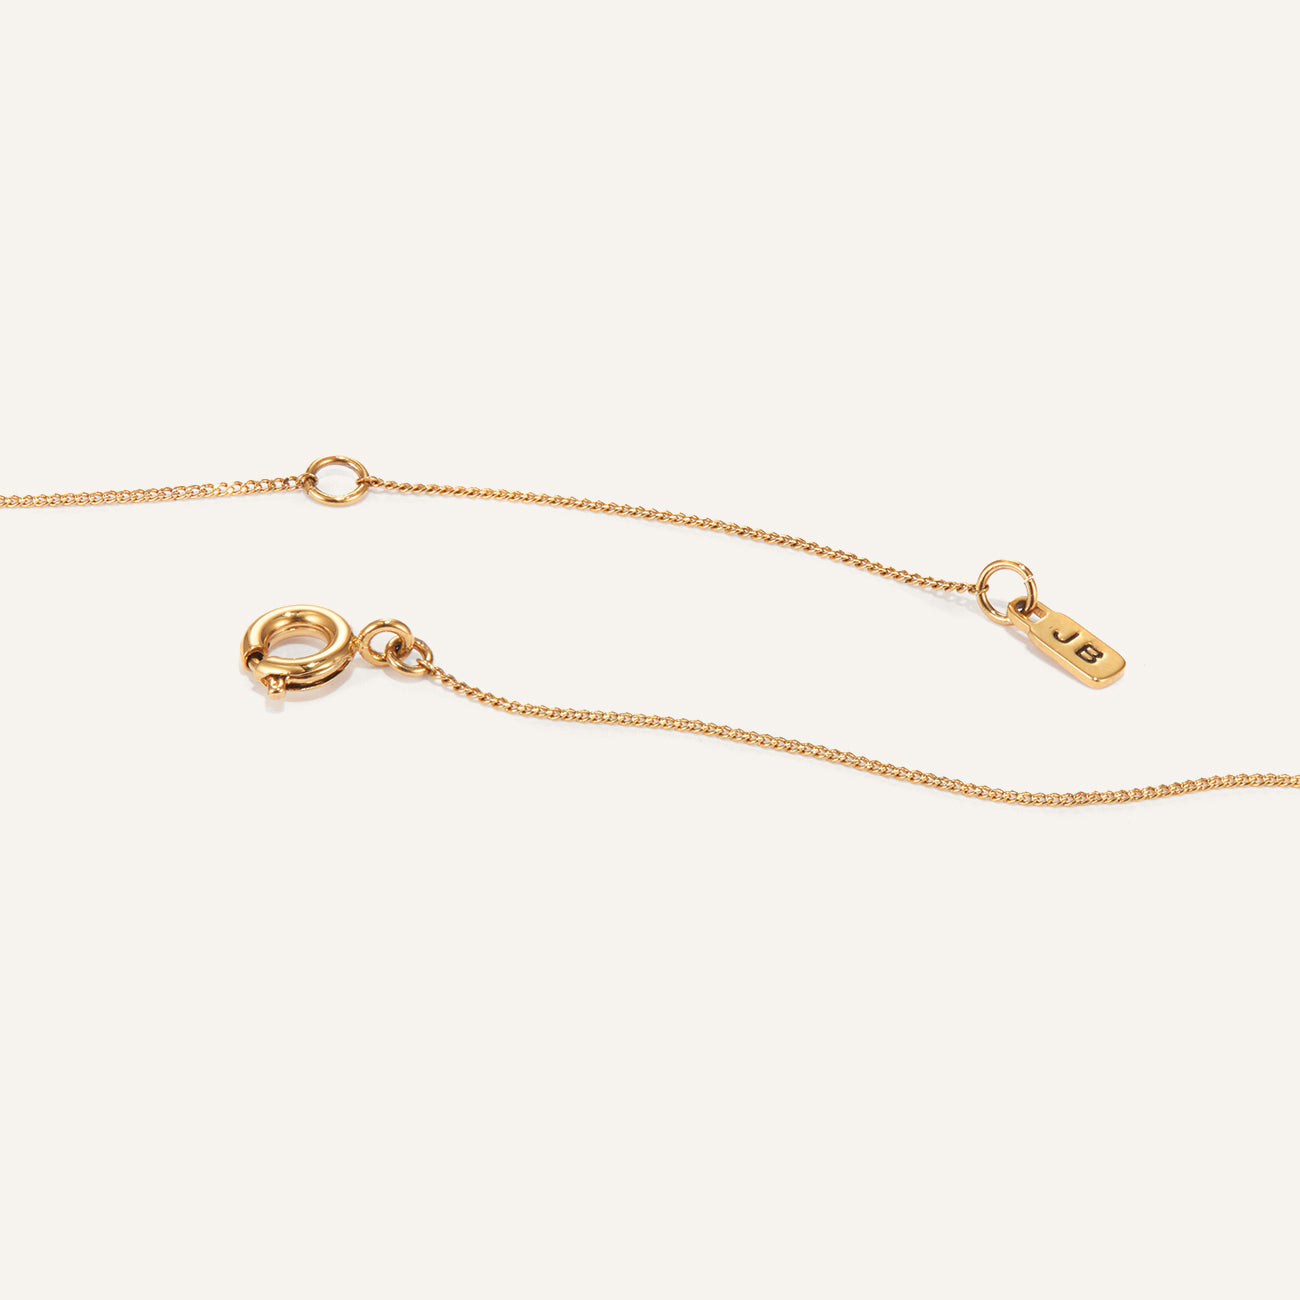 14k Gold Plated Monogram Necklace - R